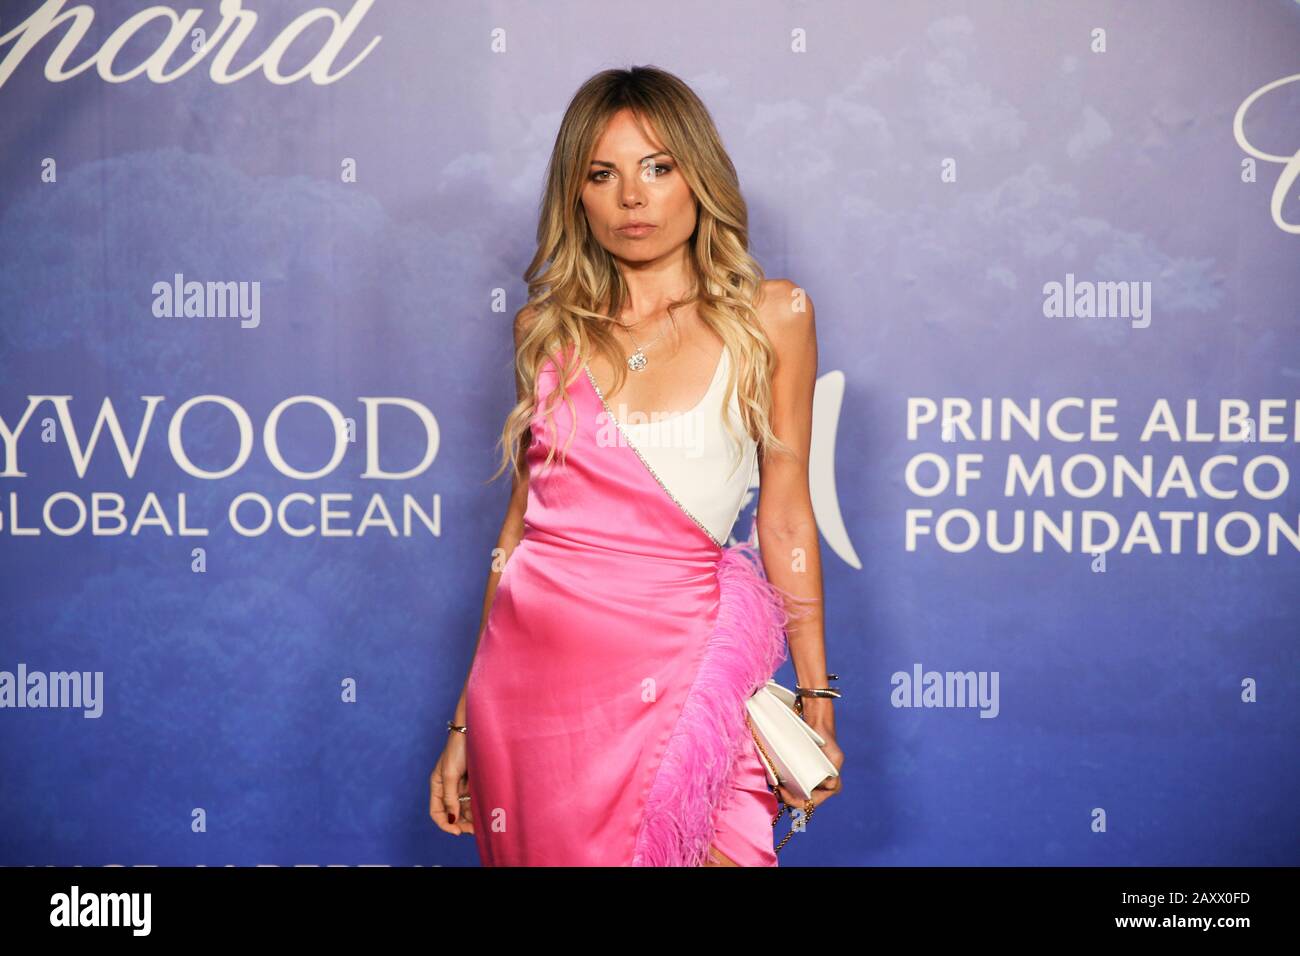 Designer Erica Pelosini attends Hollywood for the Global Ocean Gala at Beverly Hills on February 6, 2020 in Los Angeles, California. Stock Photo